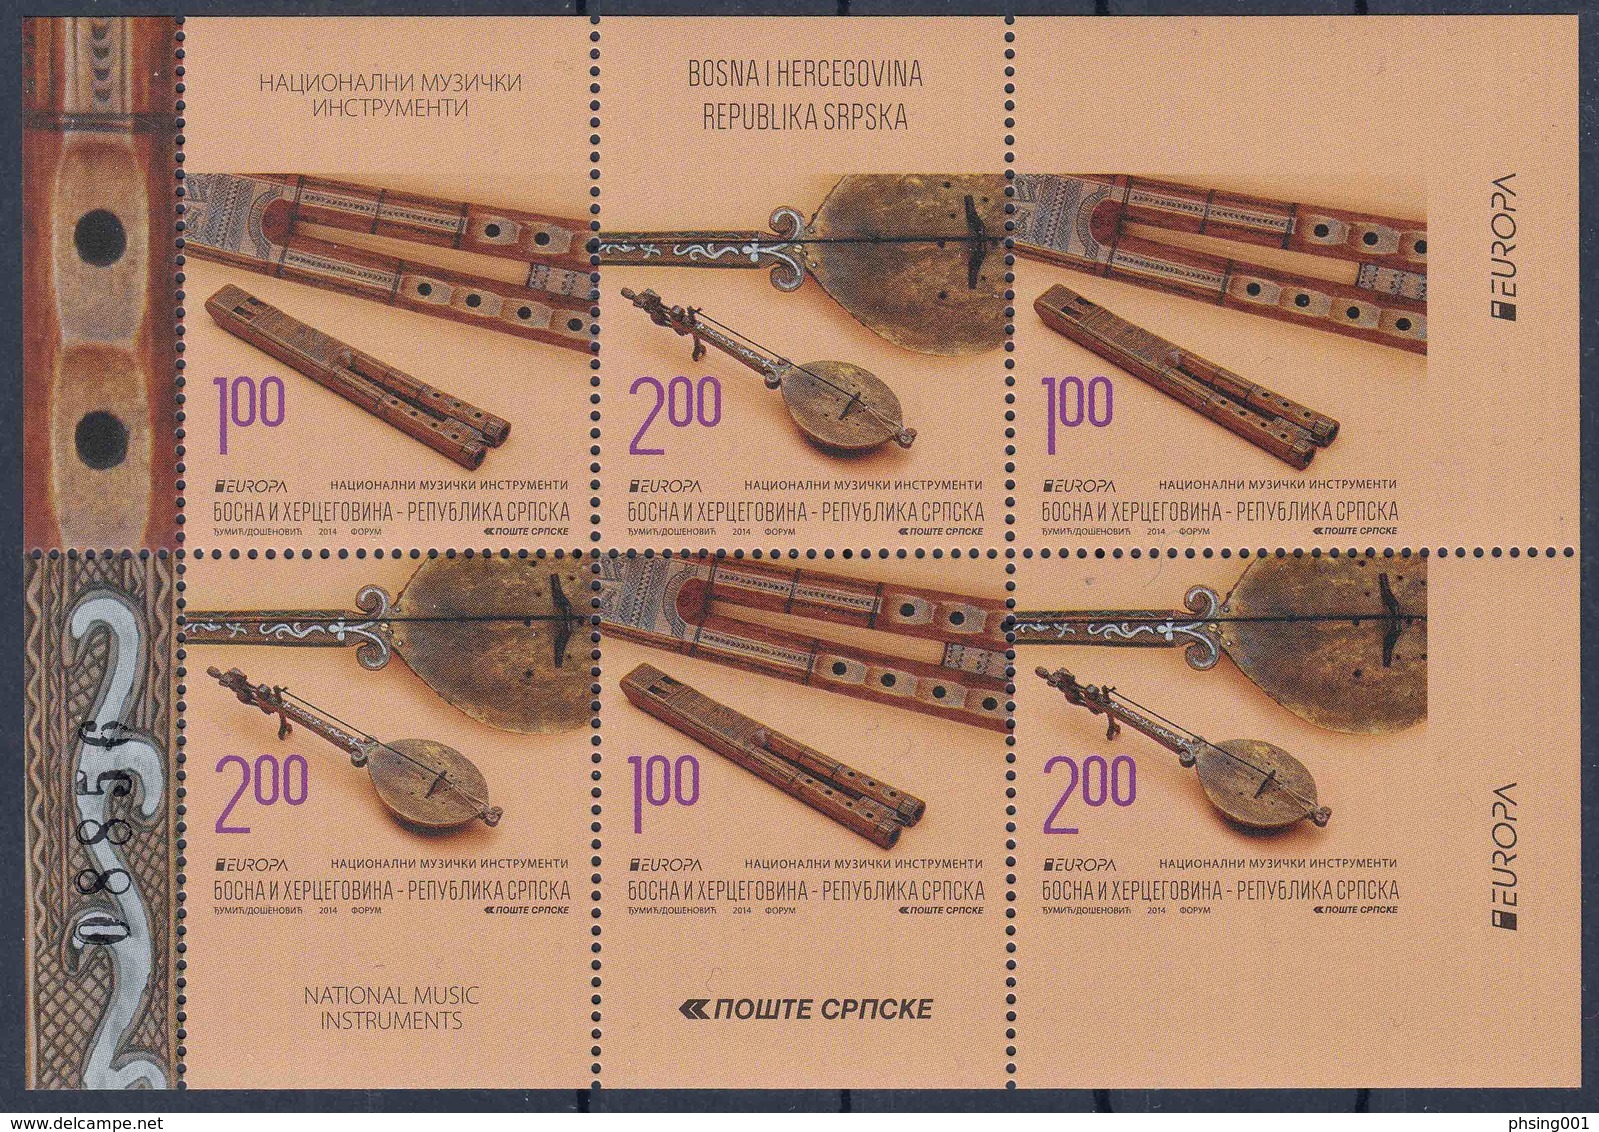 Bosnia Serbia 2014 EUROPA, National Music Instruments, Booklet MNH - 2014